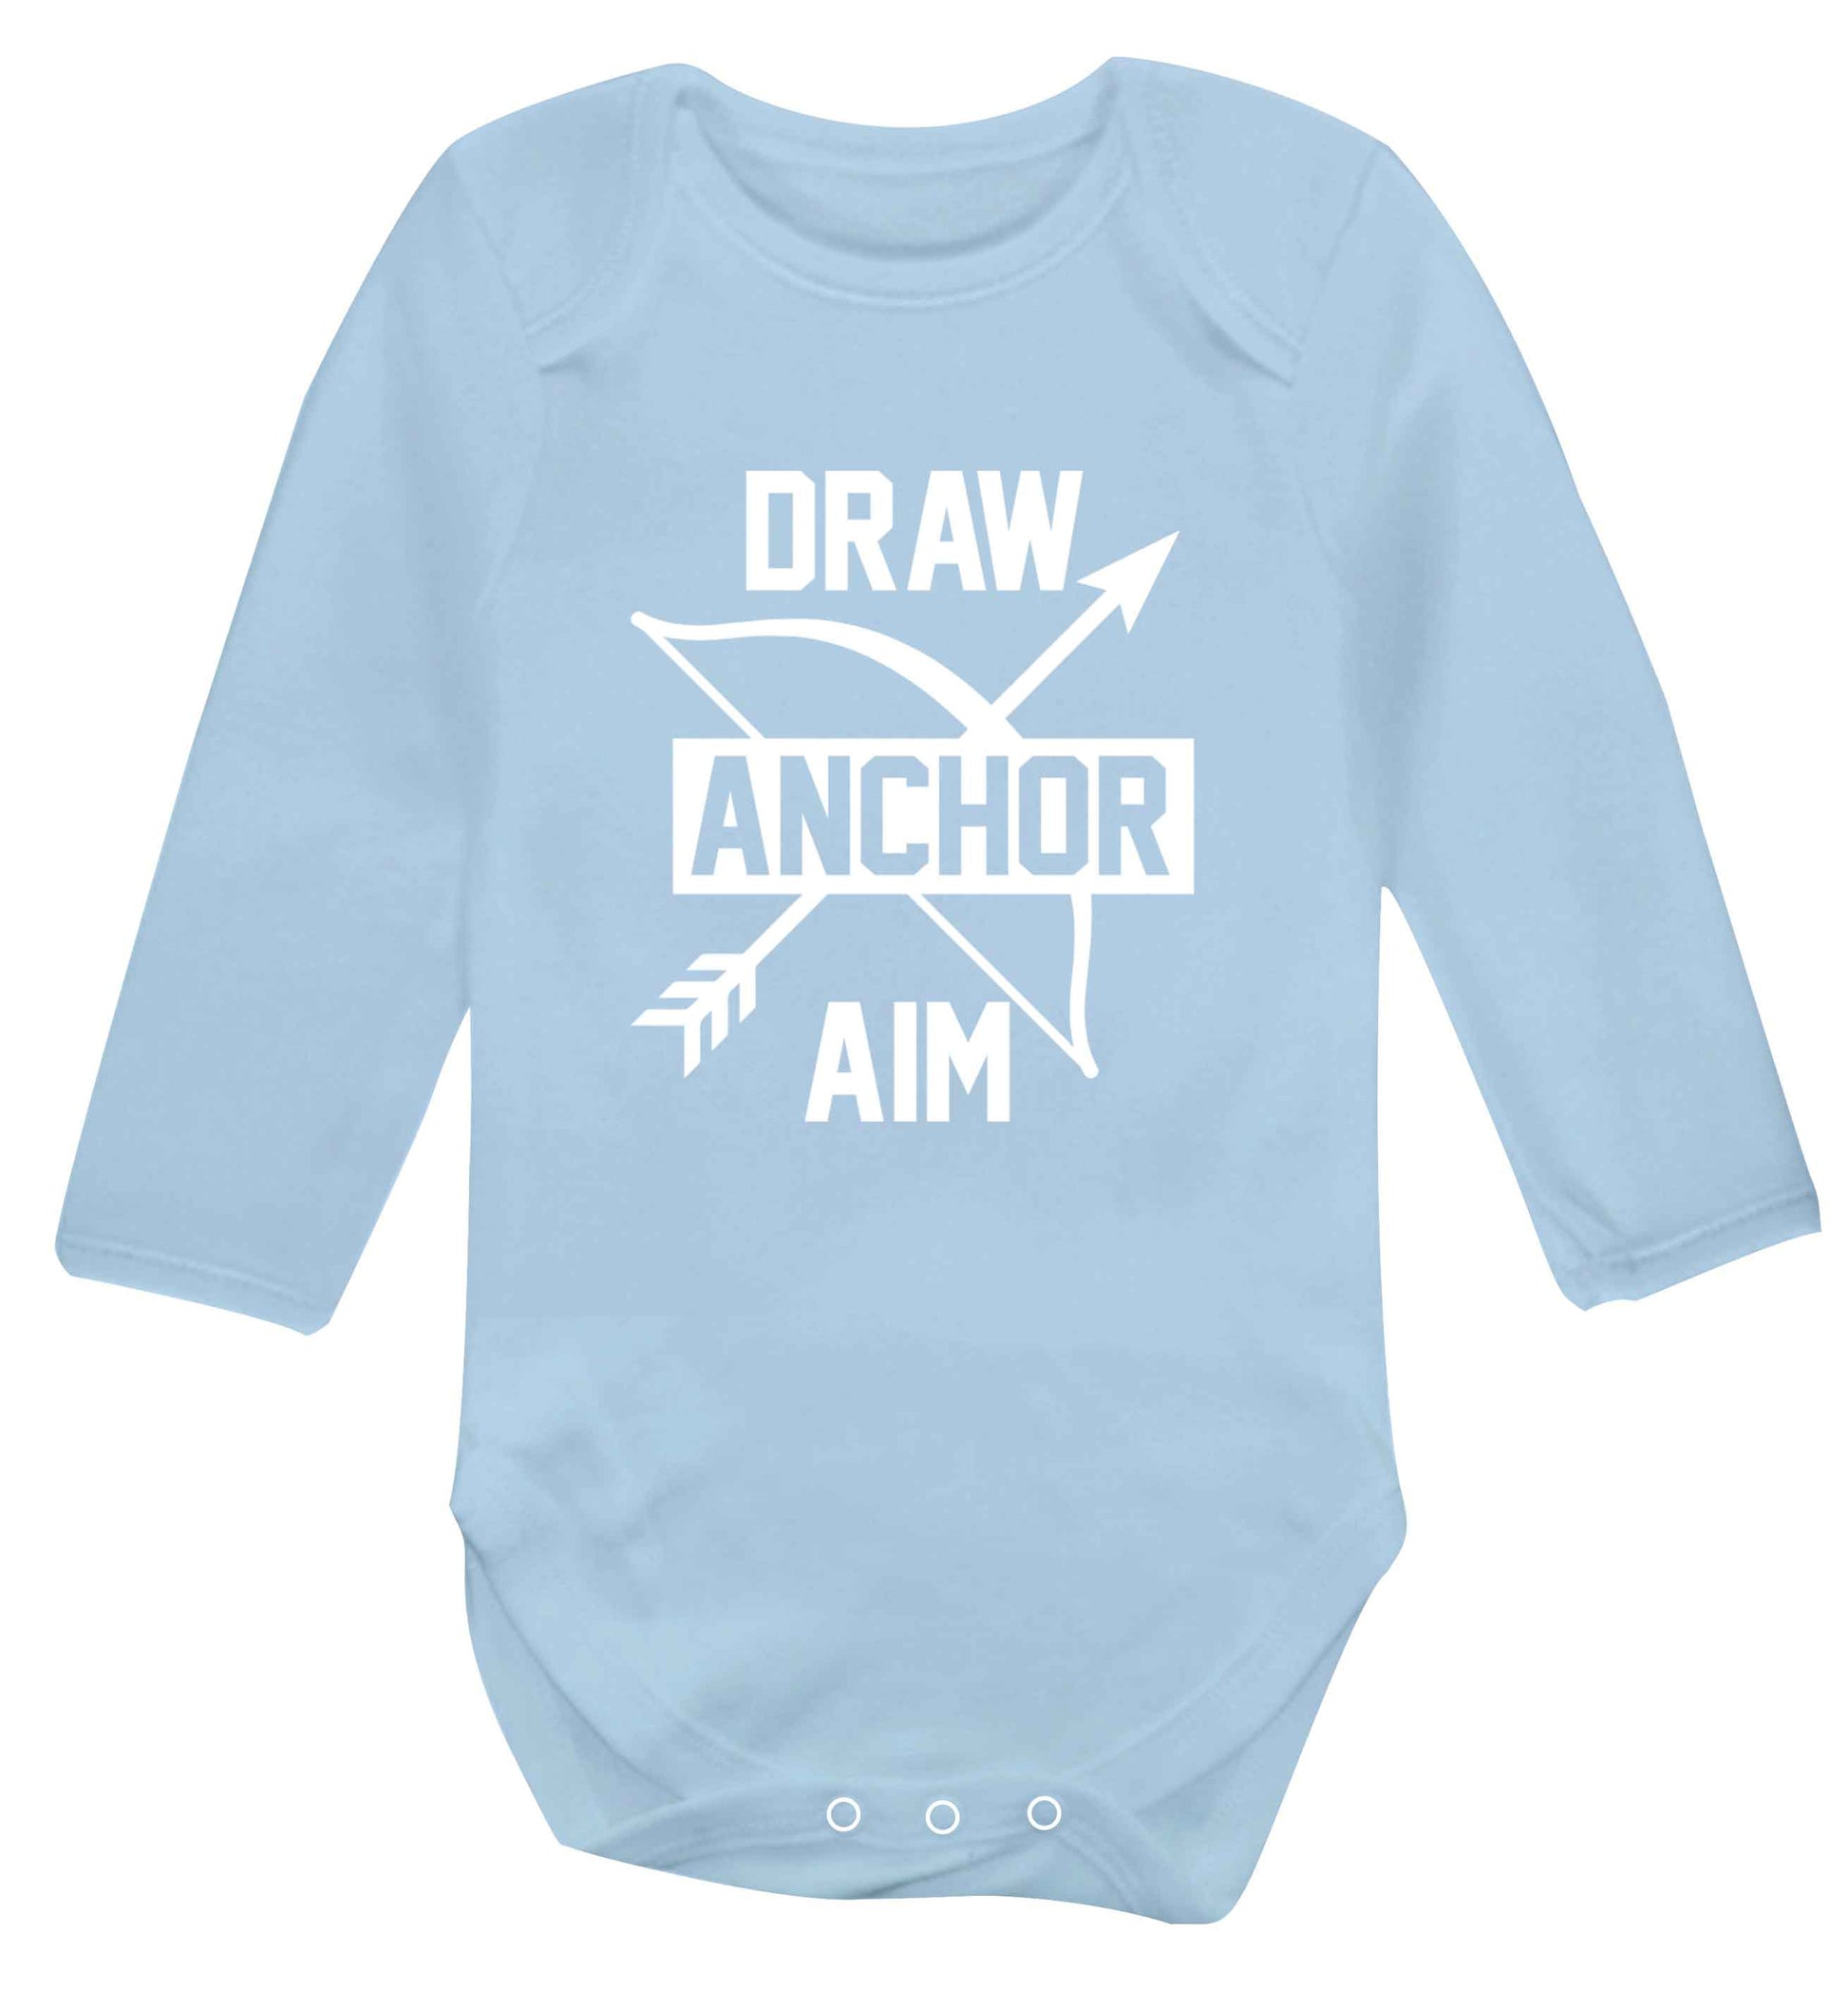 Draw anchor aim Baby Vest long sleeved pale blue 6-12 months